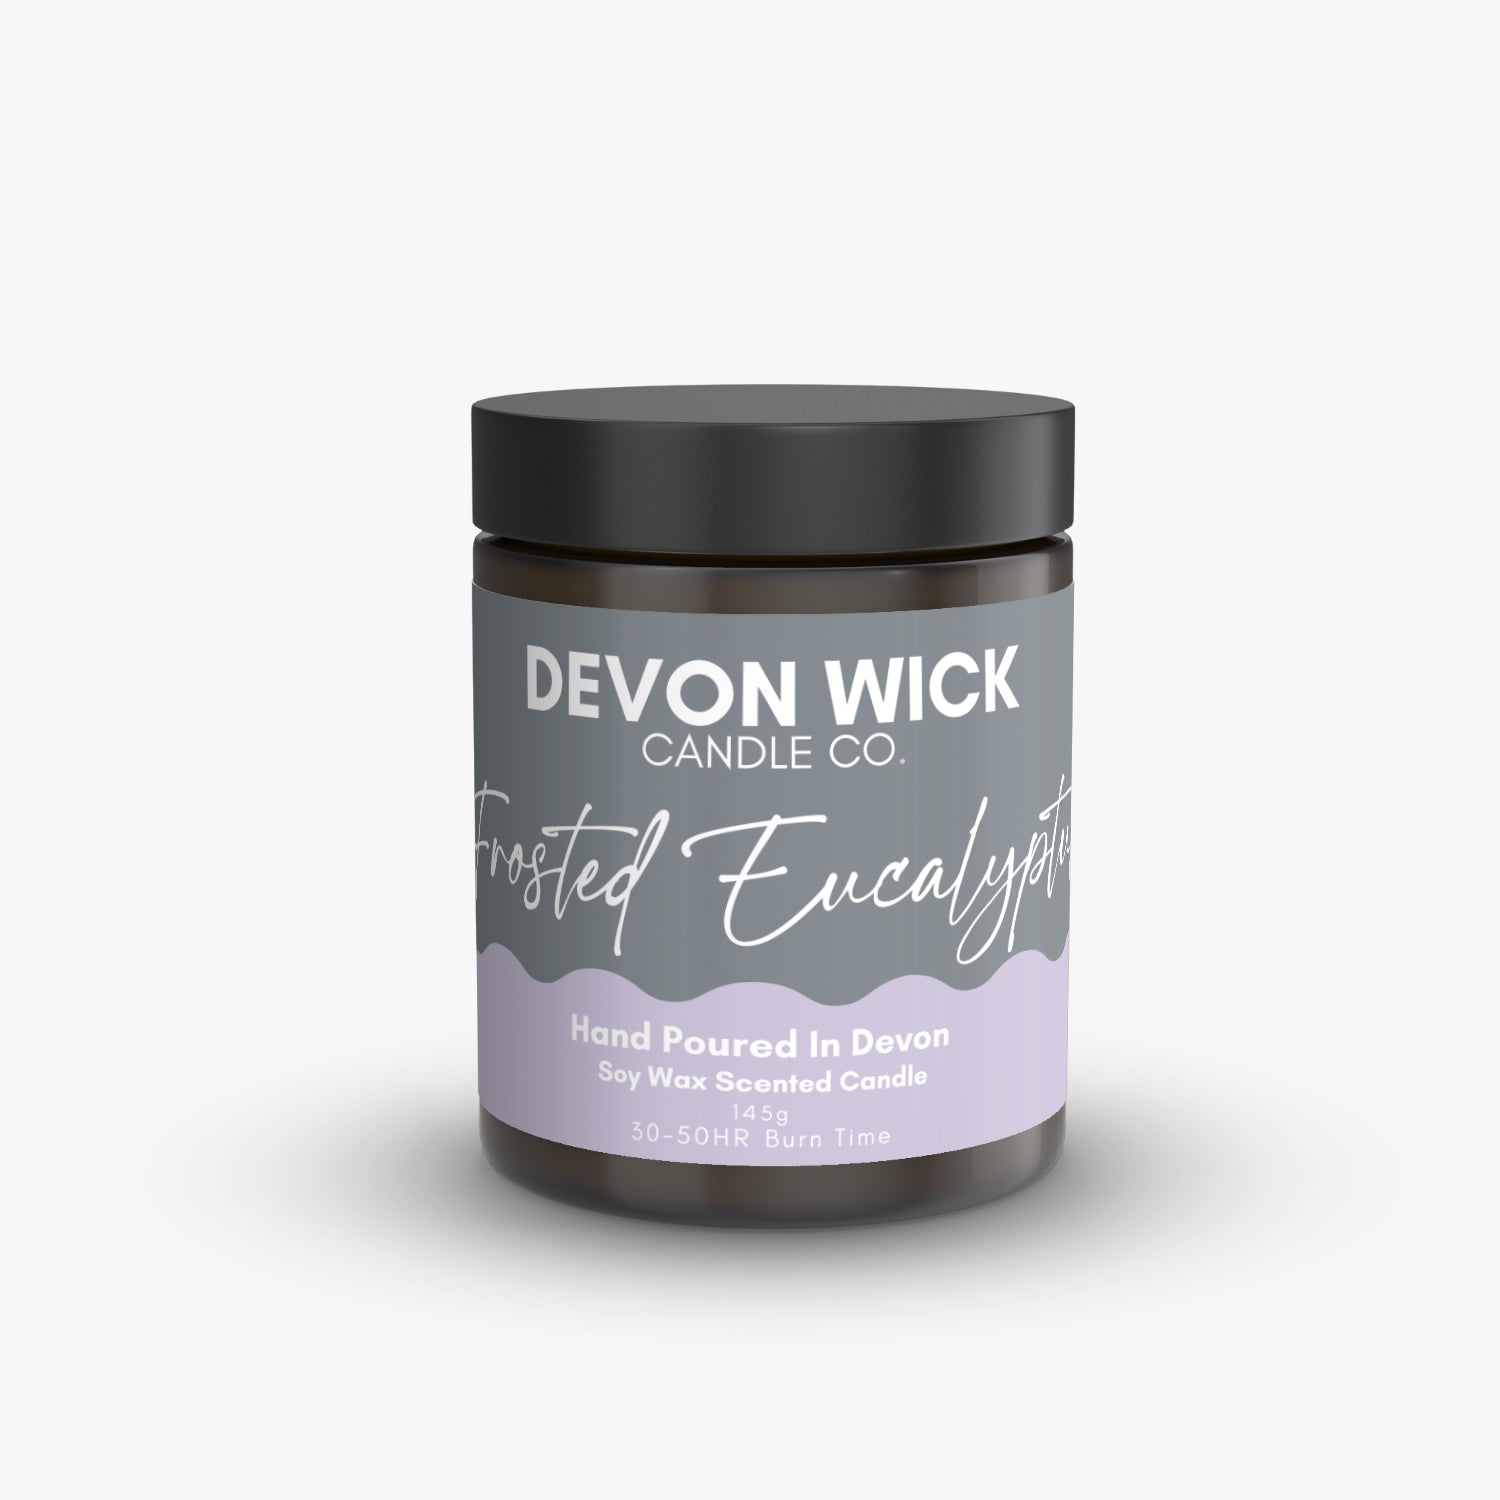 Devon Wick Candle Co. Limited Frosted Eucalyptus Soy Wax Candle